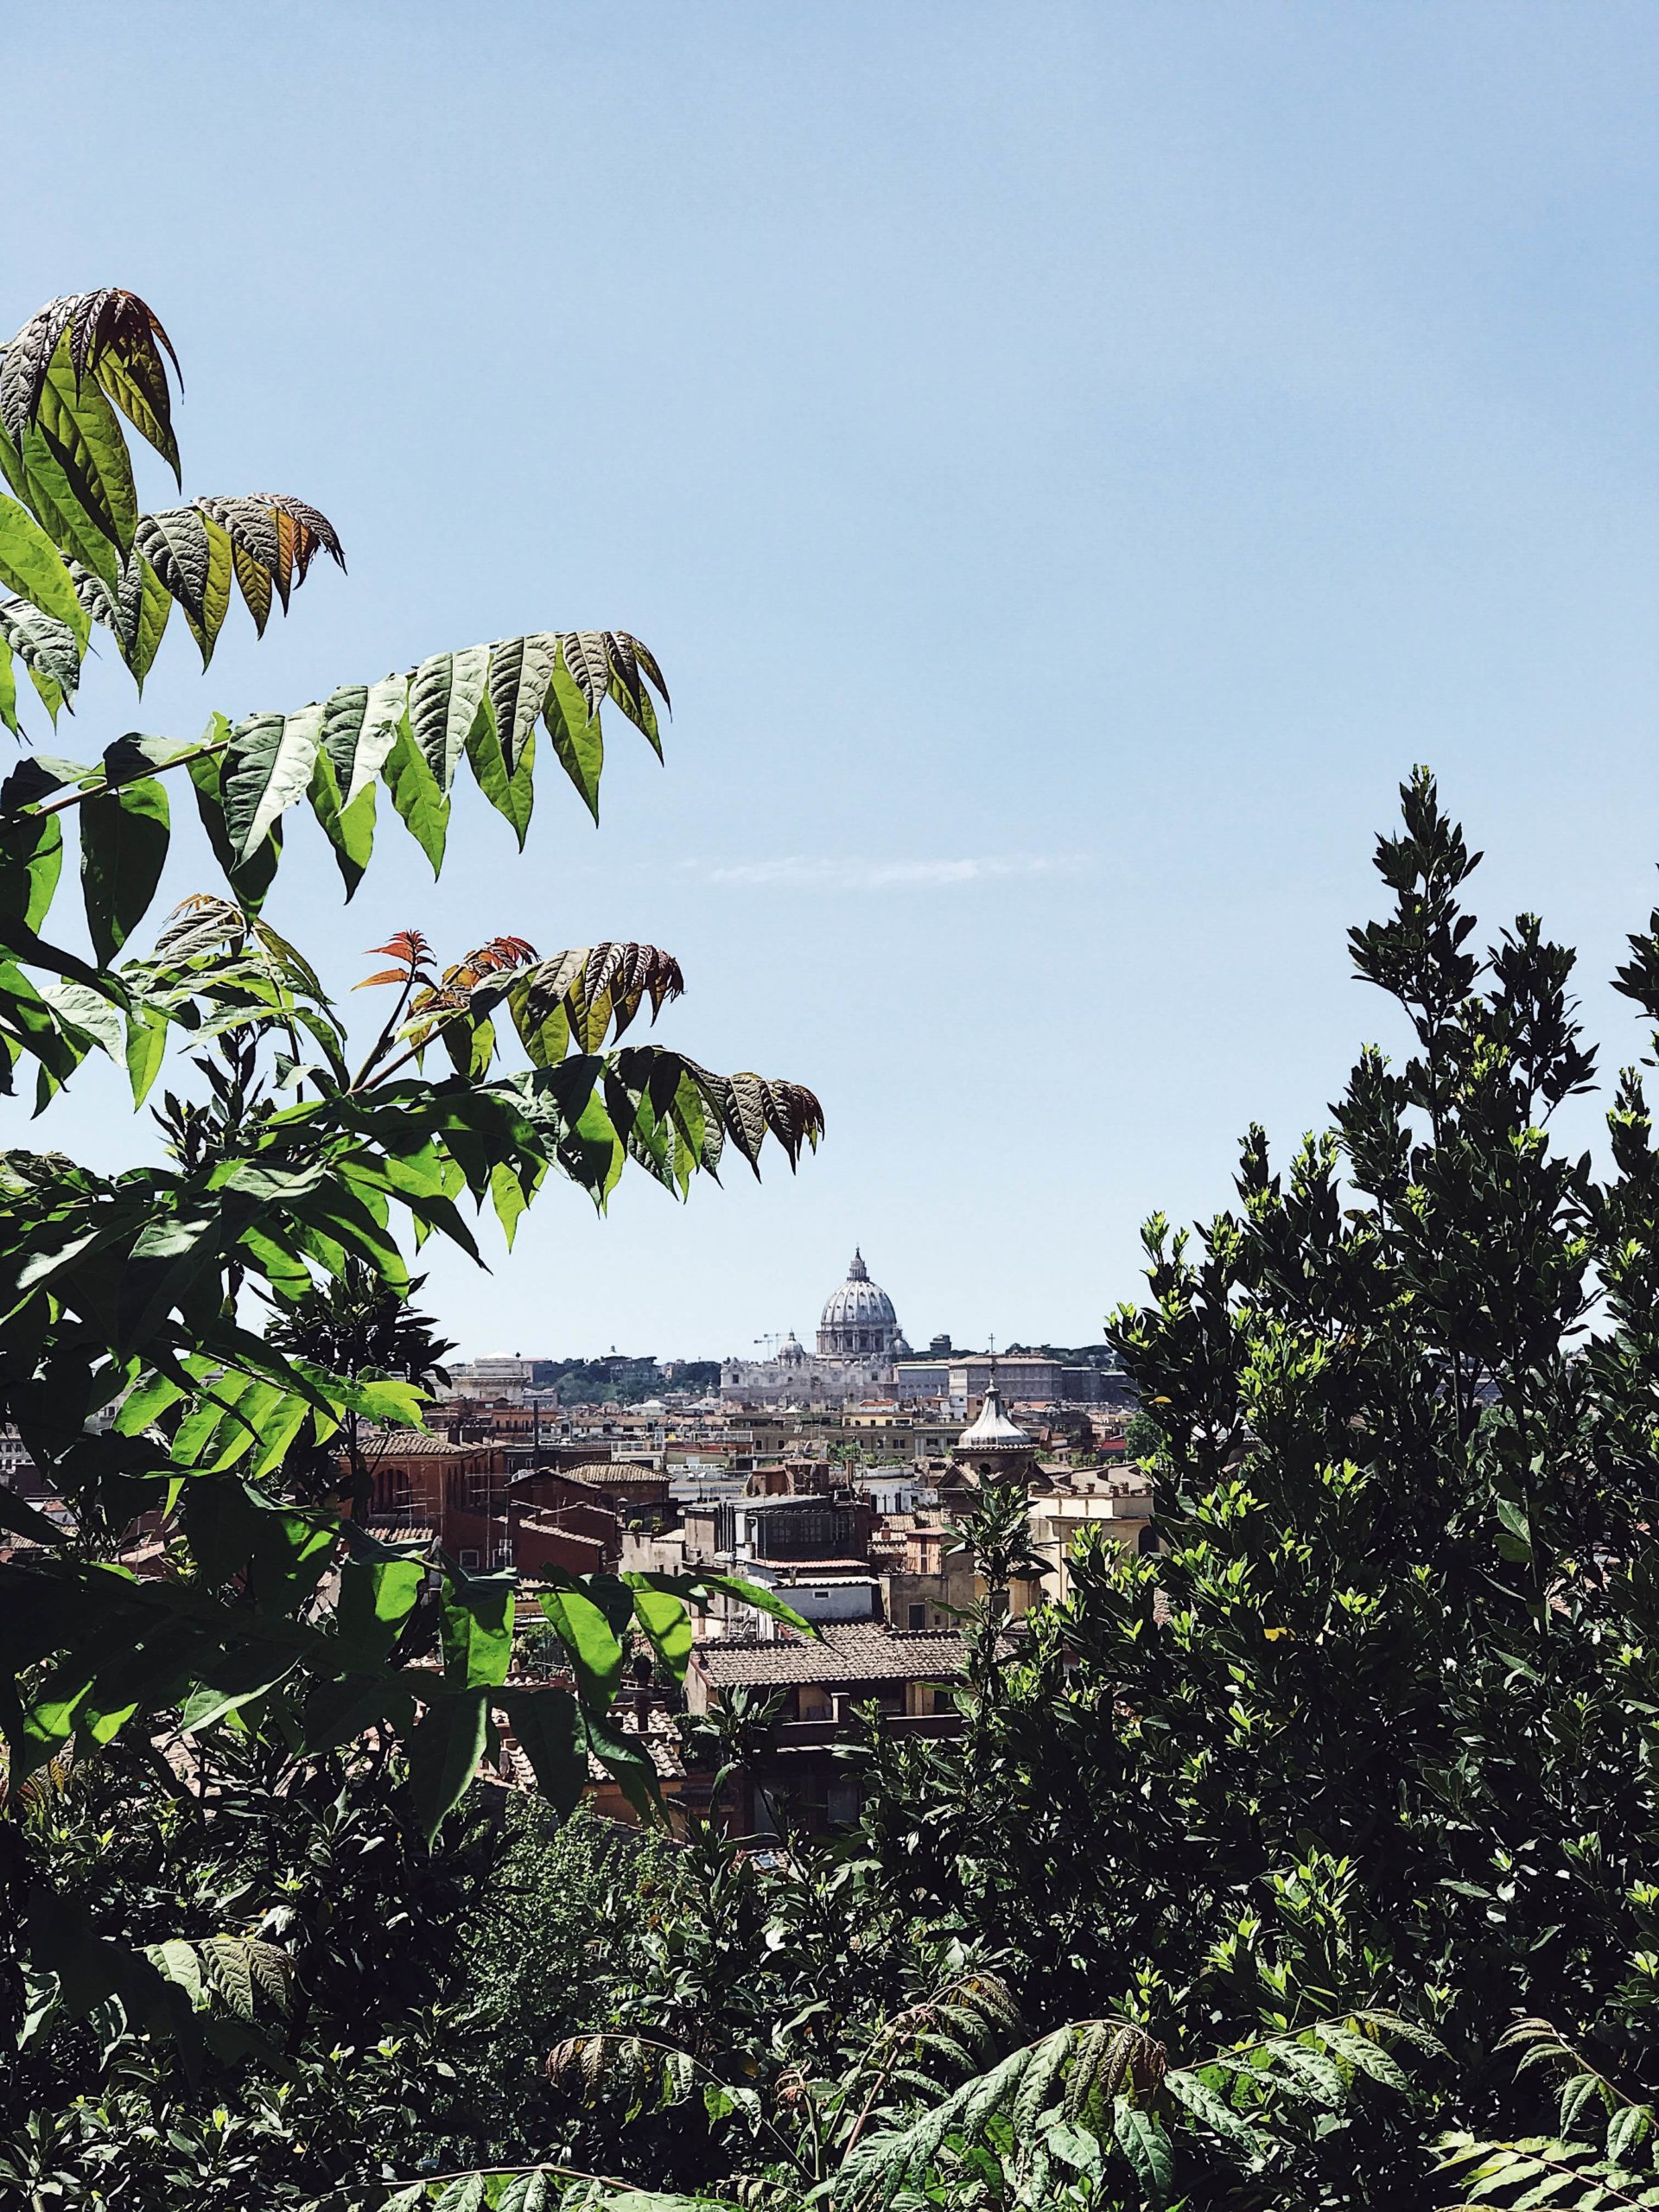 Rome in pictures: views of the city